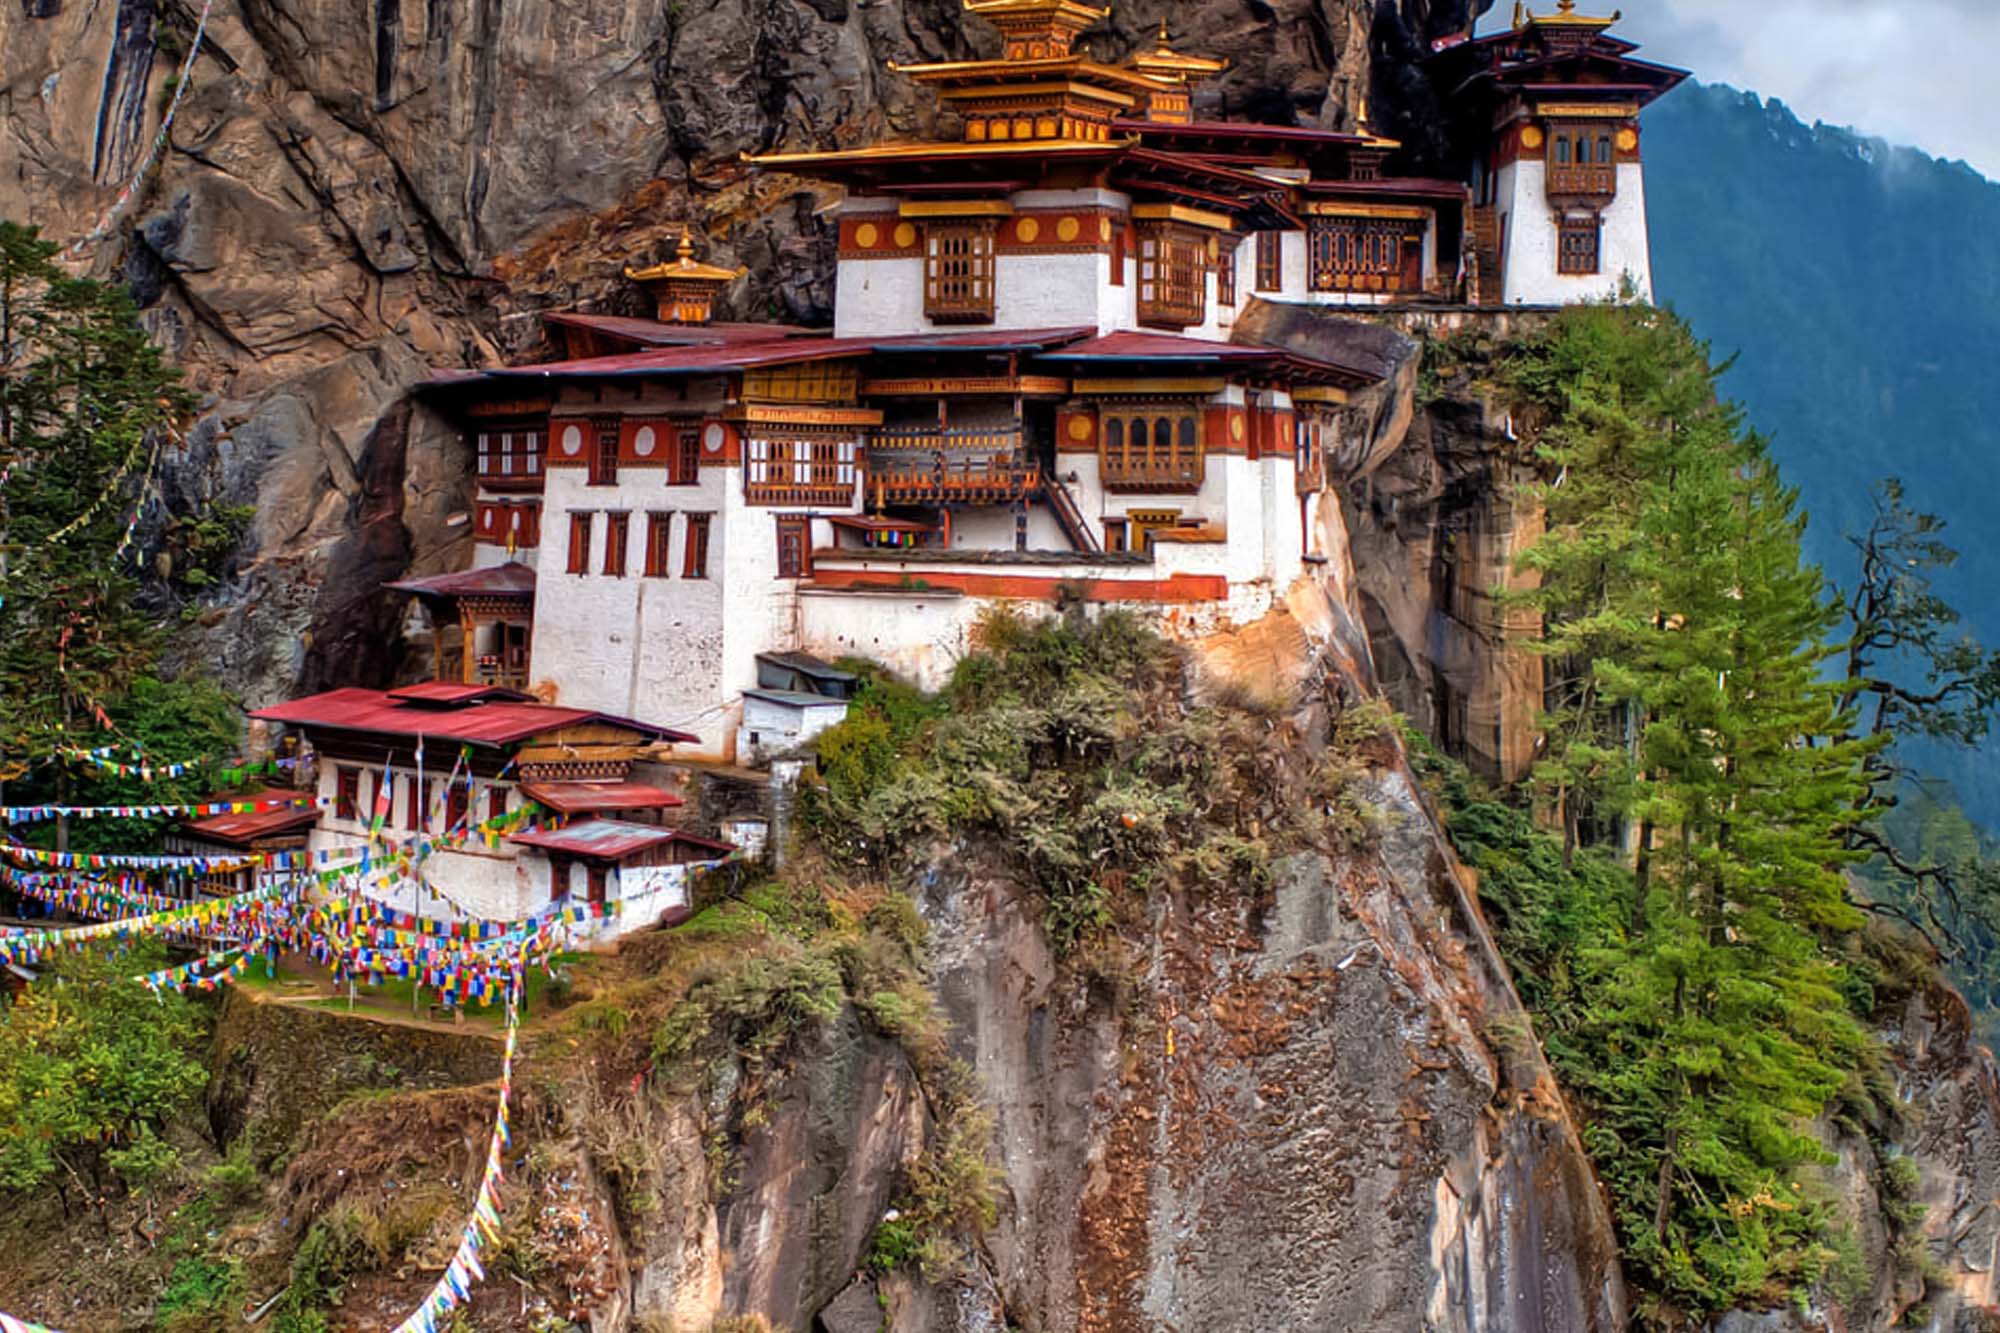 Taktsang Temple Best Things to Do in Bumthang,Explore Bumthang While Trekking or Hiking,Explore Bumthang While Pedalling,Red Panda Brewery and Cheese Factory,Nomad Festival,Tour to Sheep Breeding Farm,How to Get to Bumthang,Stay in Bumthang,Where to Eat in Bumthang